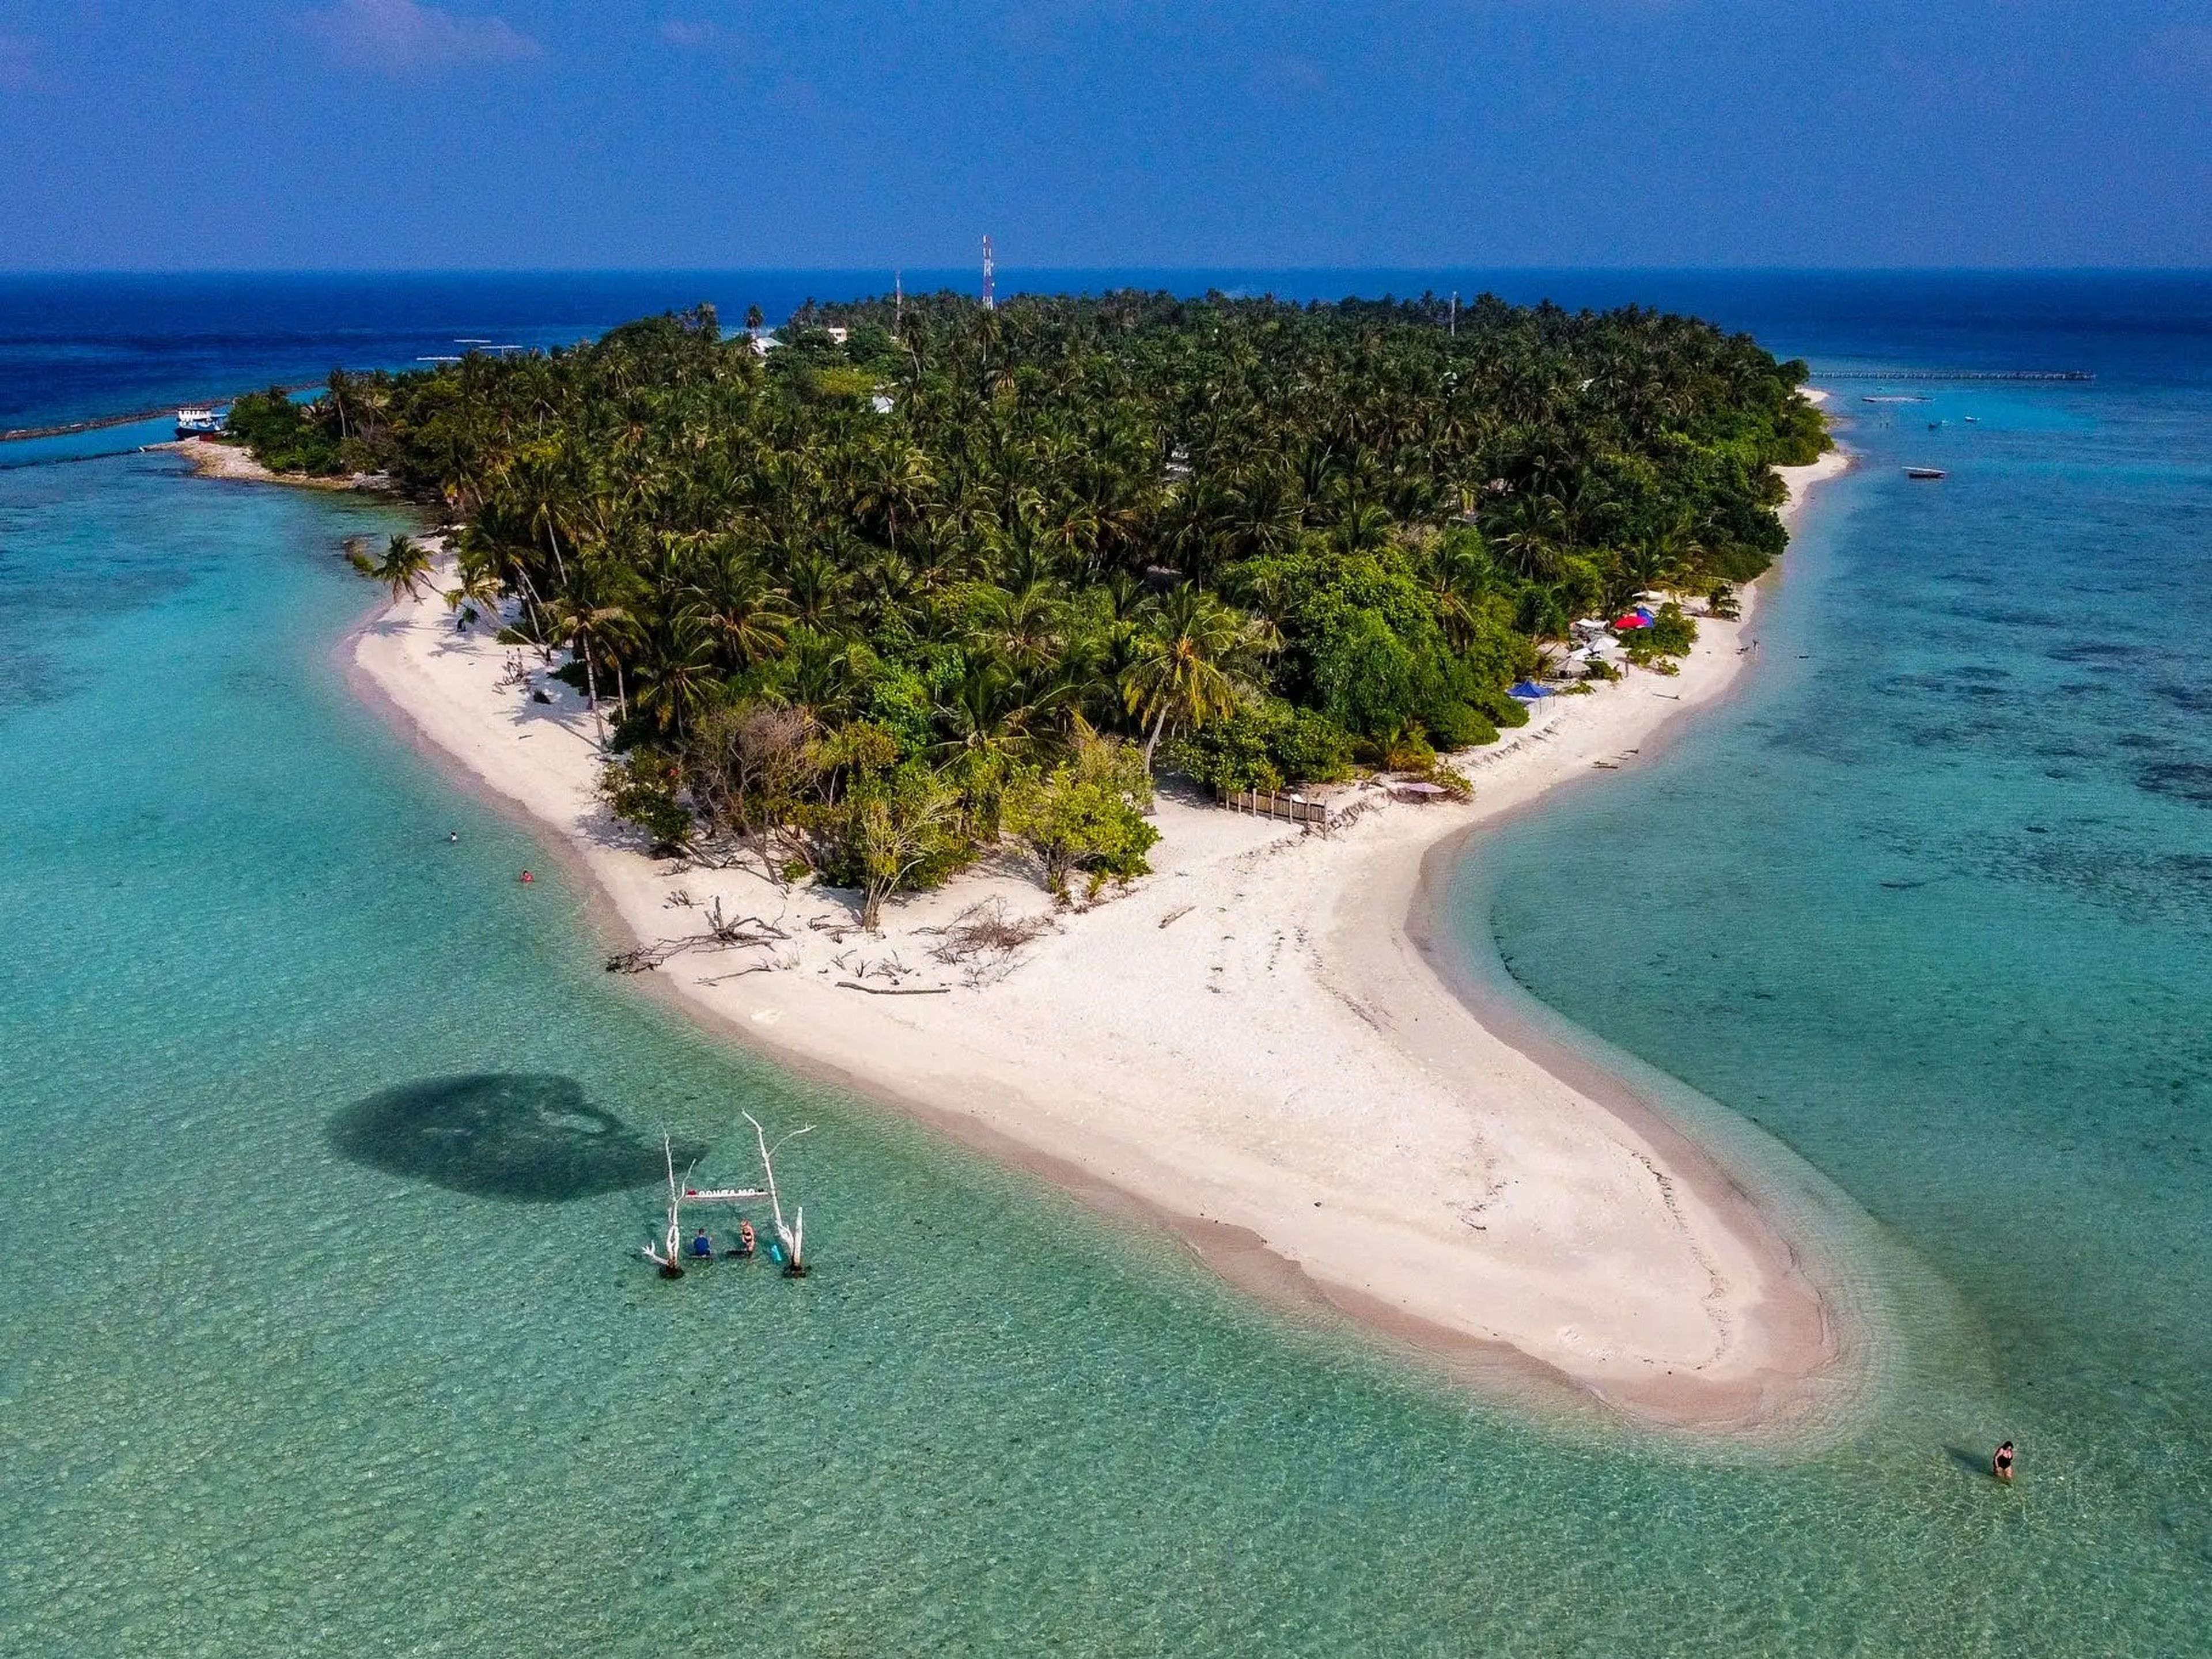 An aerial view of Omadhoo Island, which is covered in lush green trees and surrounded by aqua-blue water.